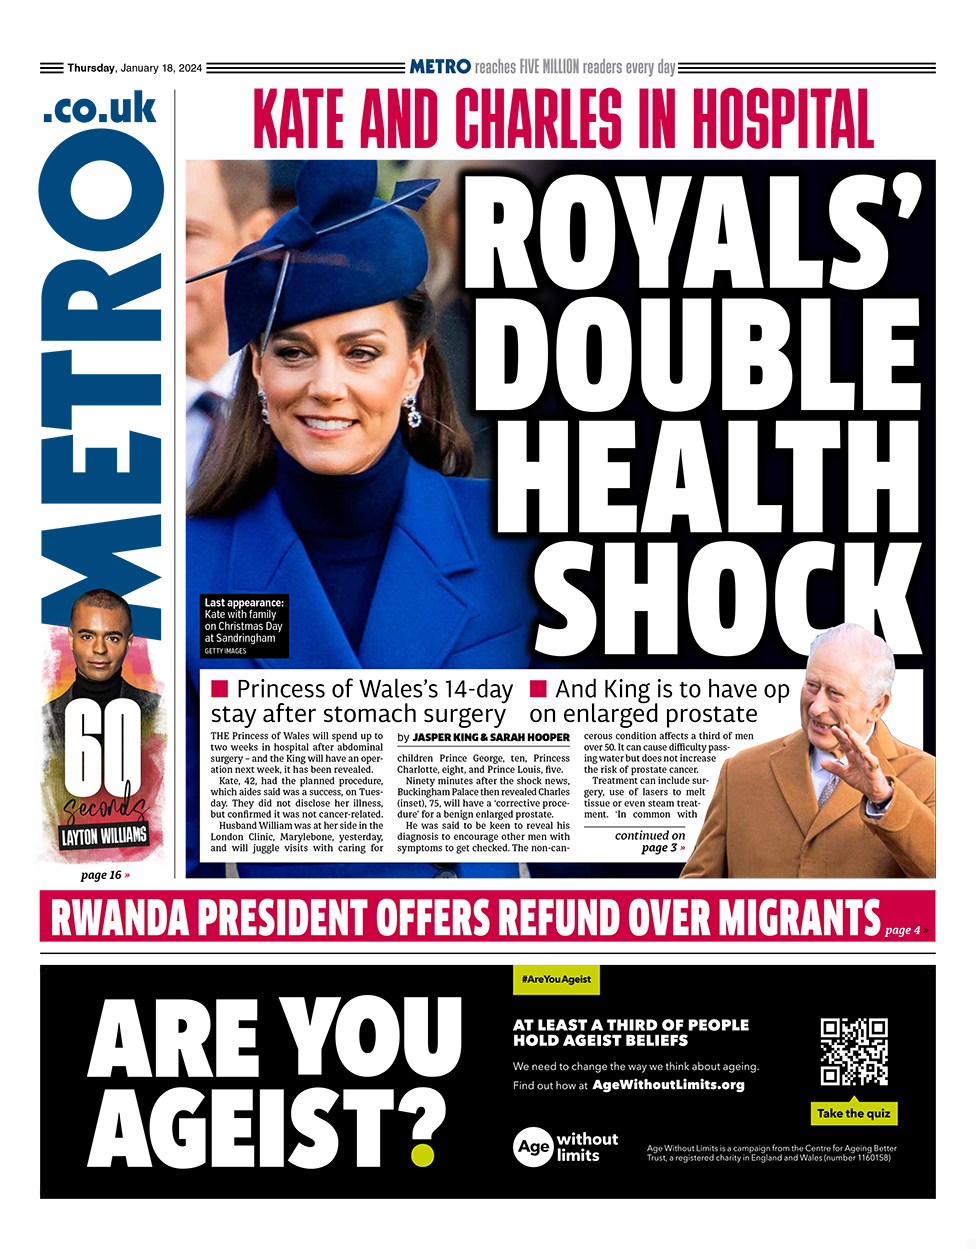 The headline in the Metro reads: "Royals' double health shock".